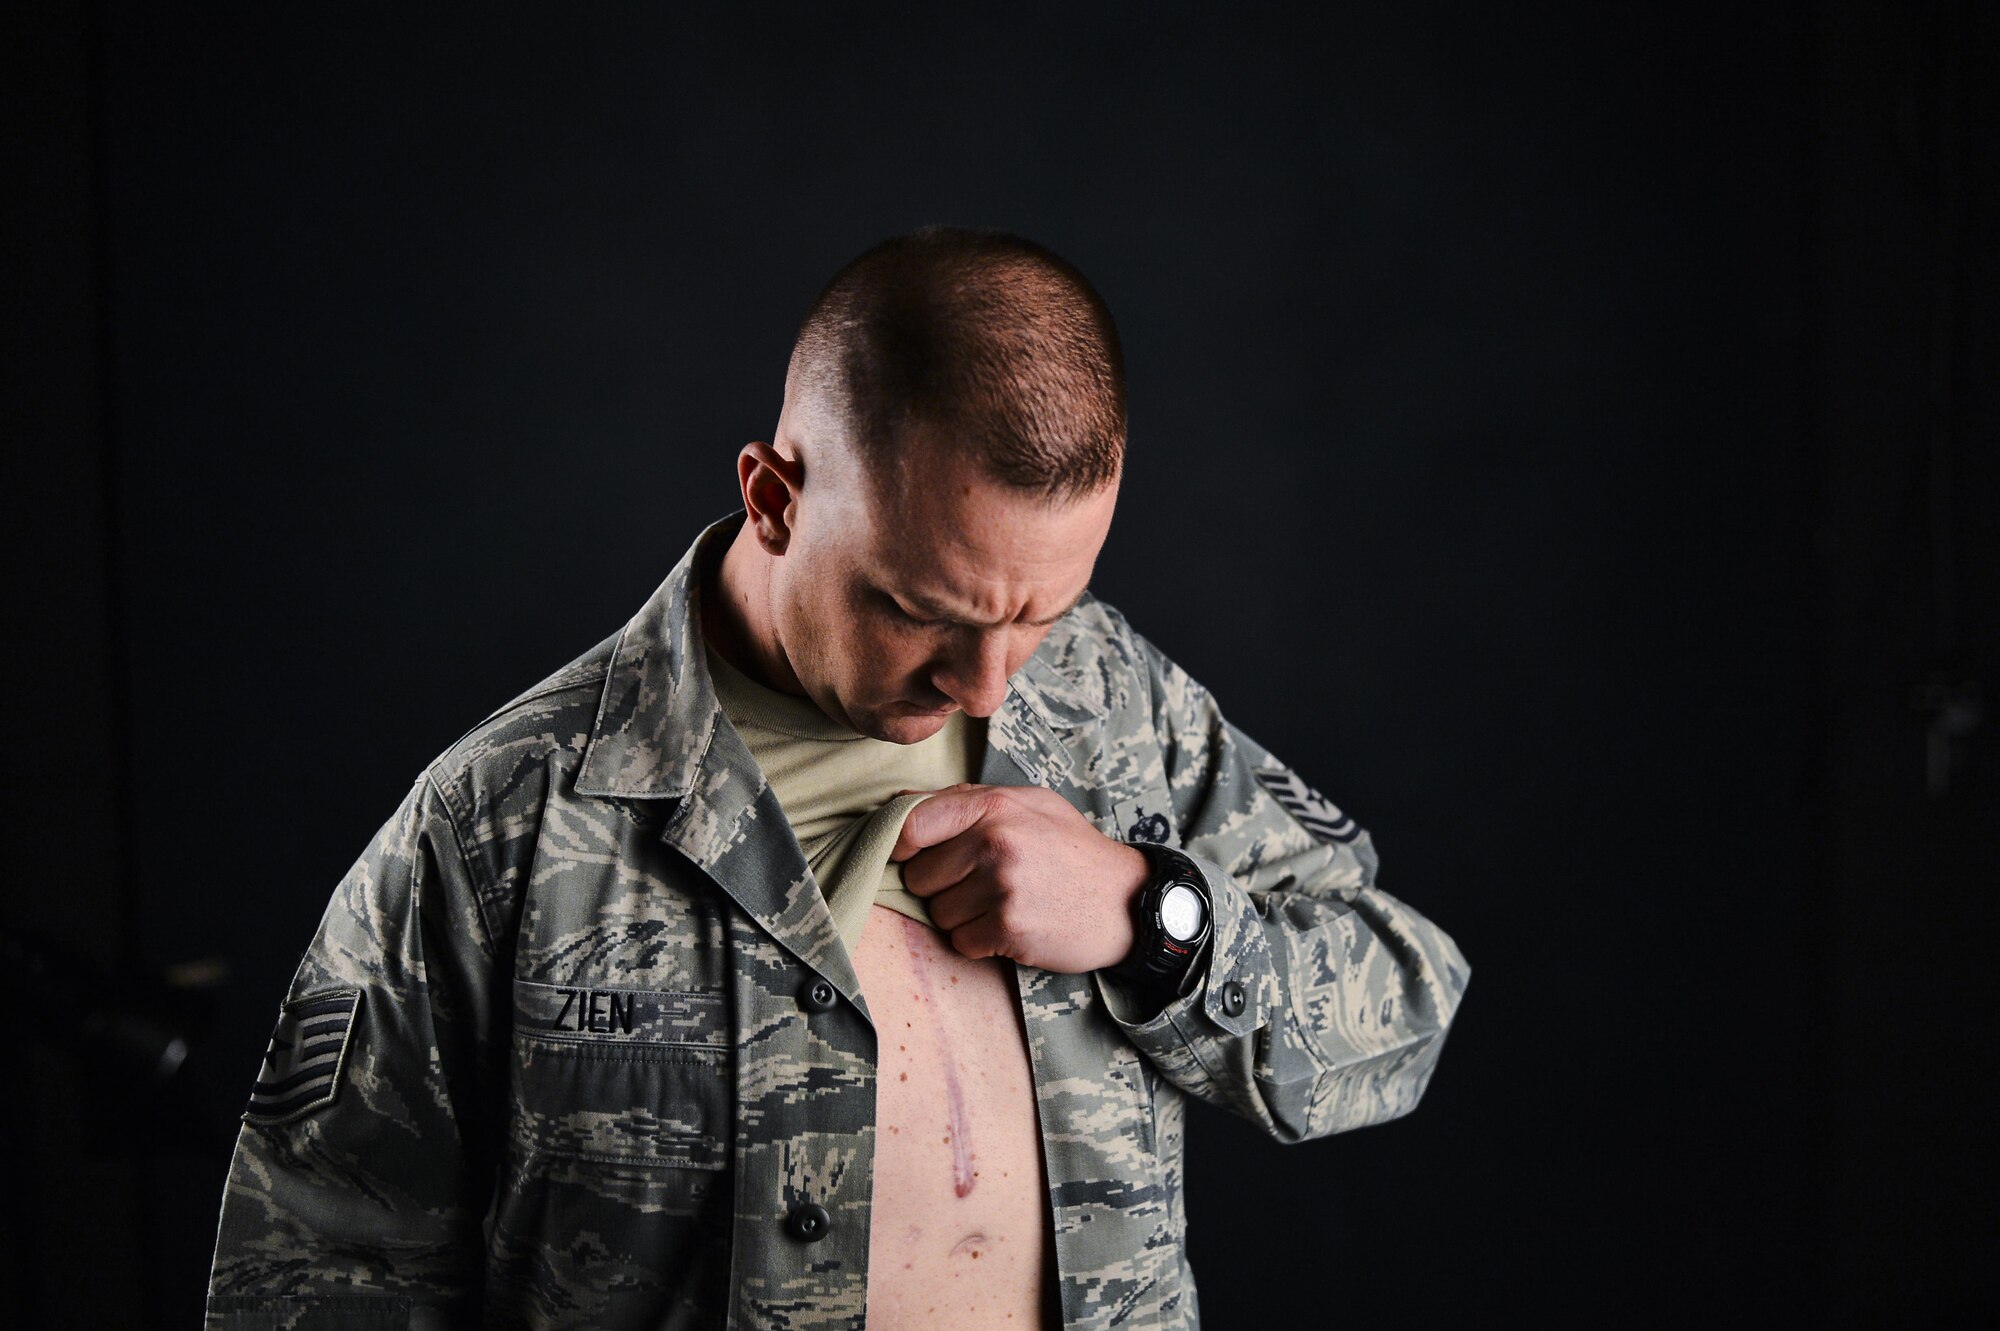 Tech. Sgt. Matthew Zien shows his scars from a life-saving operation that replaced two heart valves and took away vegetation from around his heart. He was in an induced coma for more than 42 hours during the open-heart surgery. (U.S. Air Force photo/Senior Airman Riley Johnson)
